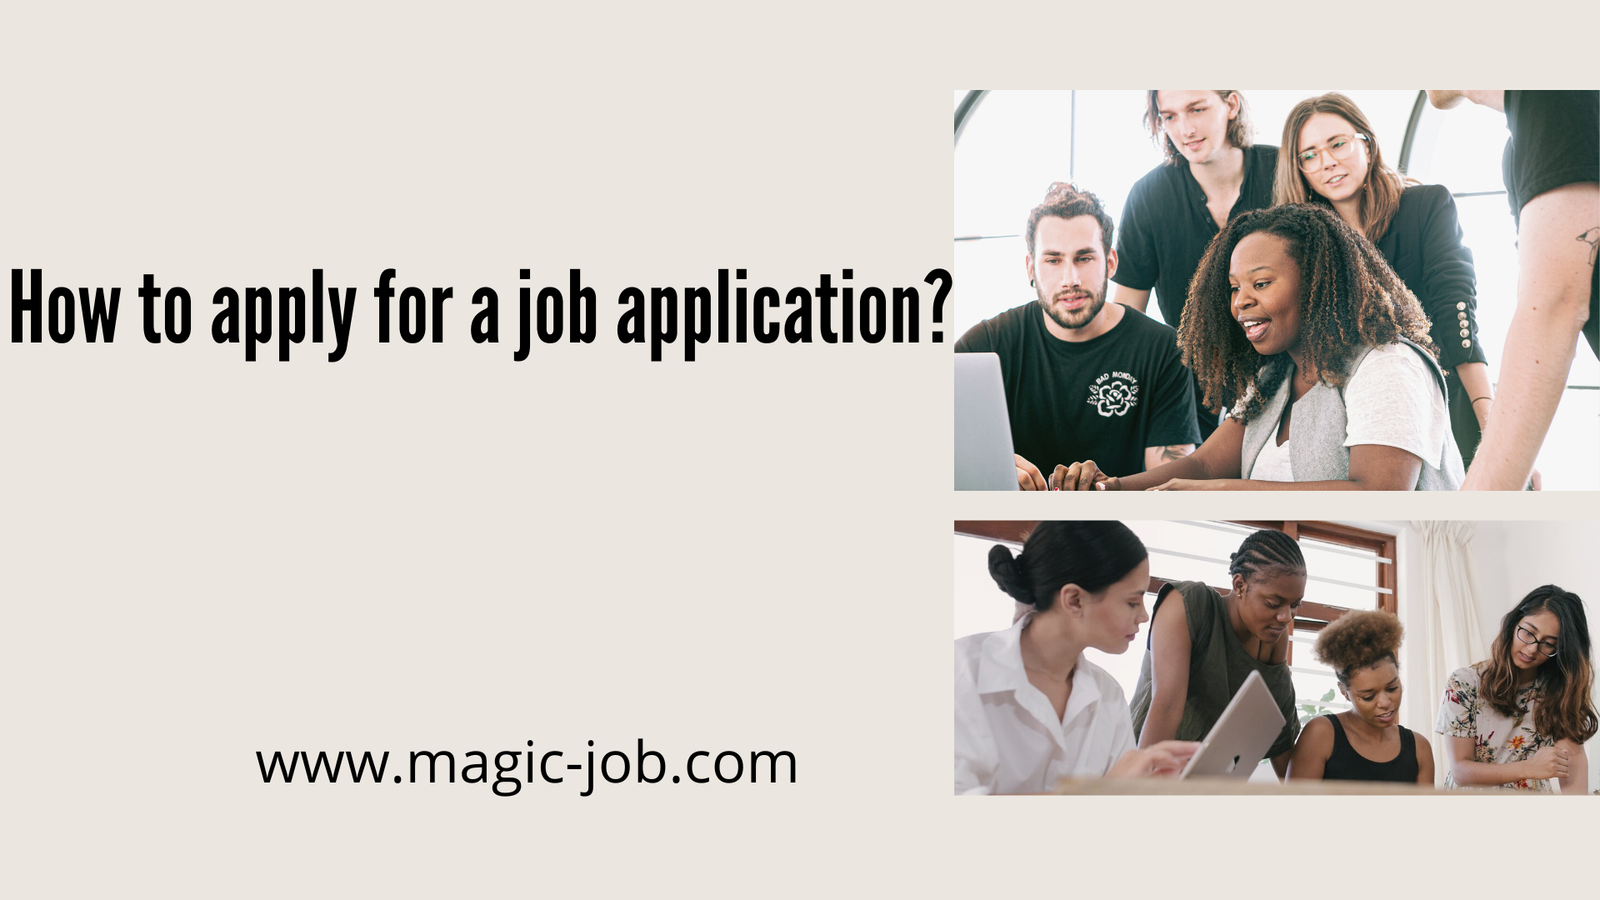 How to Apply for a Job Application? image